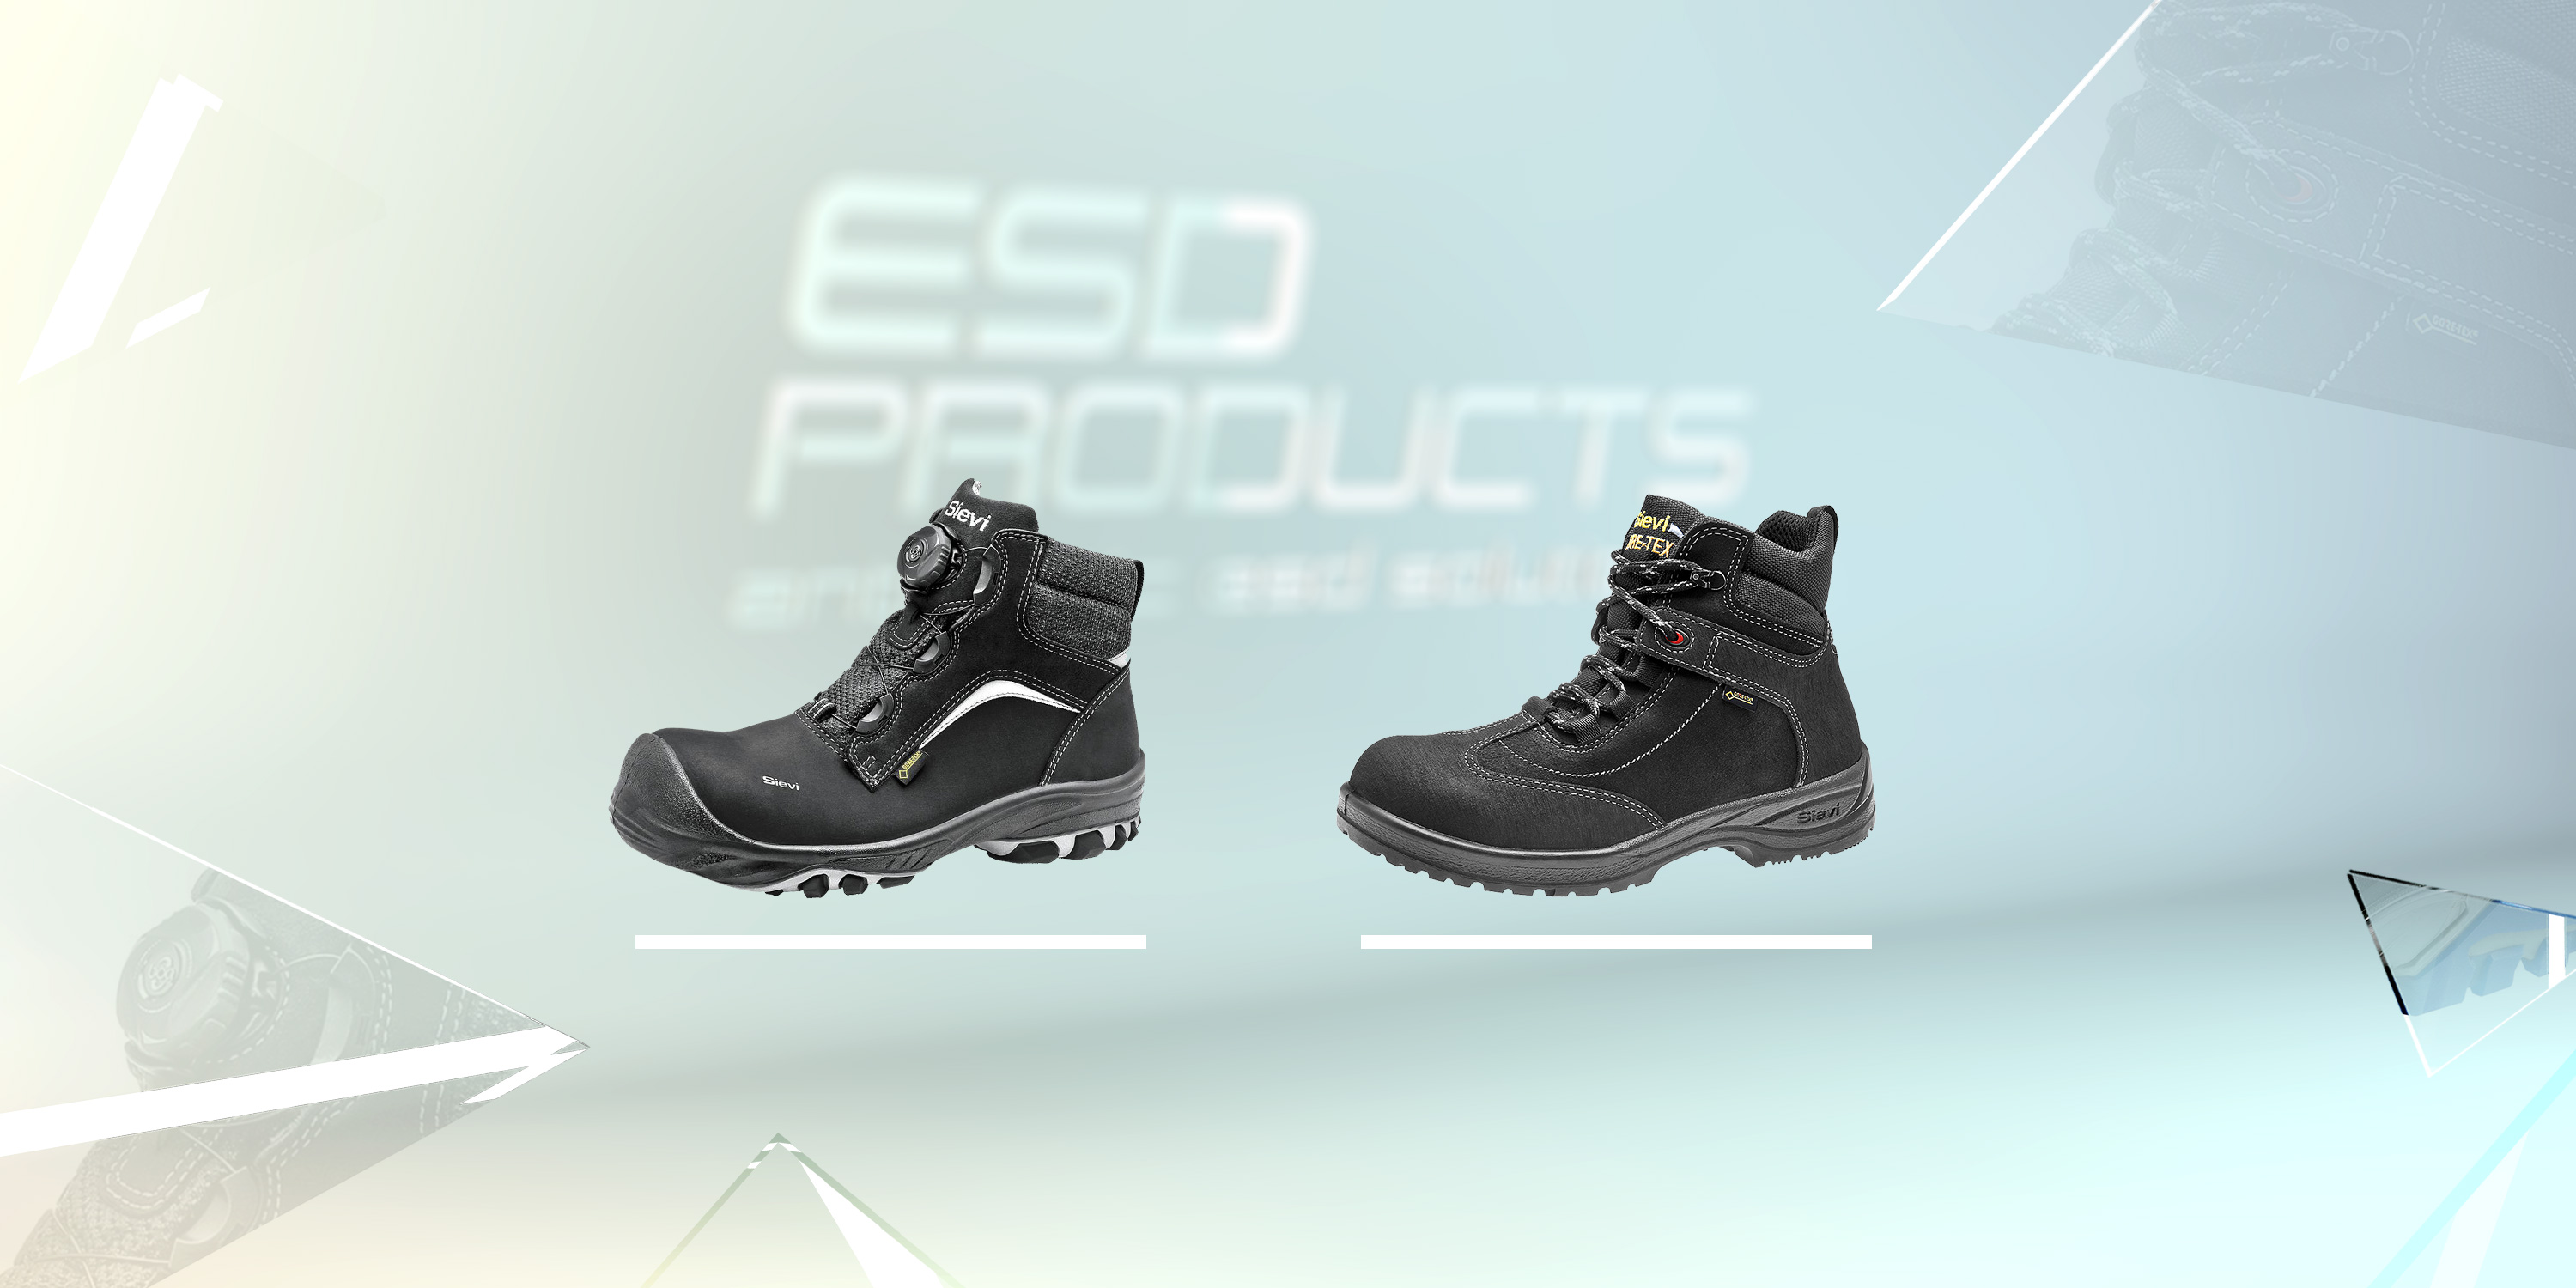 Anti-Static Safety Shoes Work Protective Footwear Electric Static Dissipative Footwear Anti Static antistatic AES 